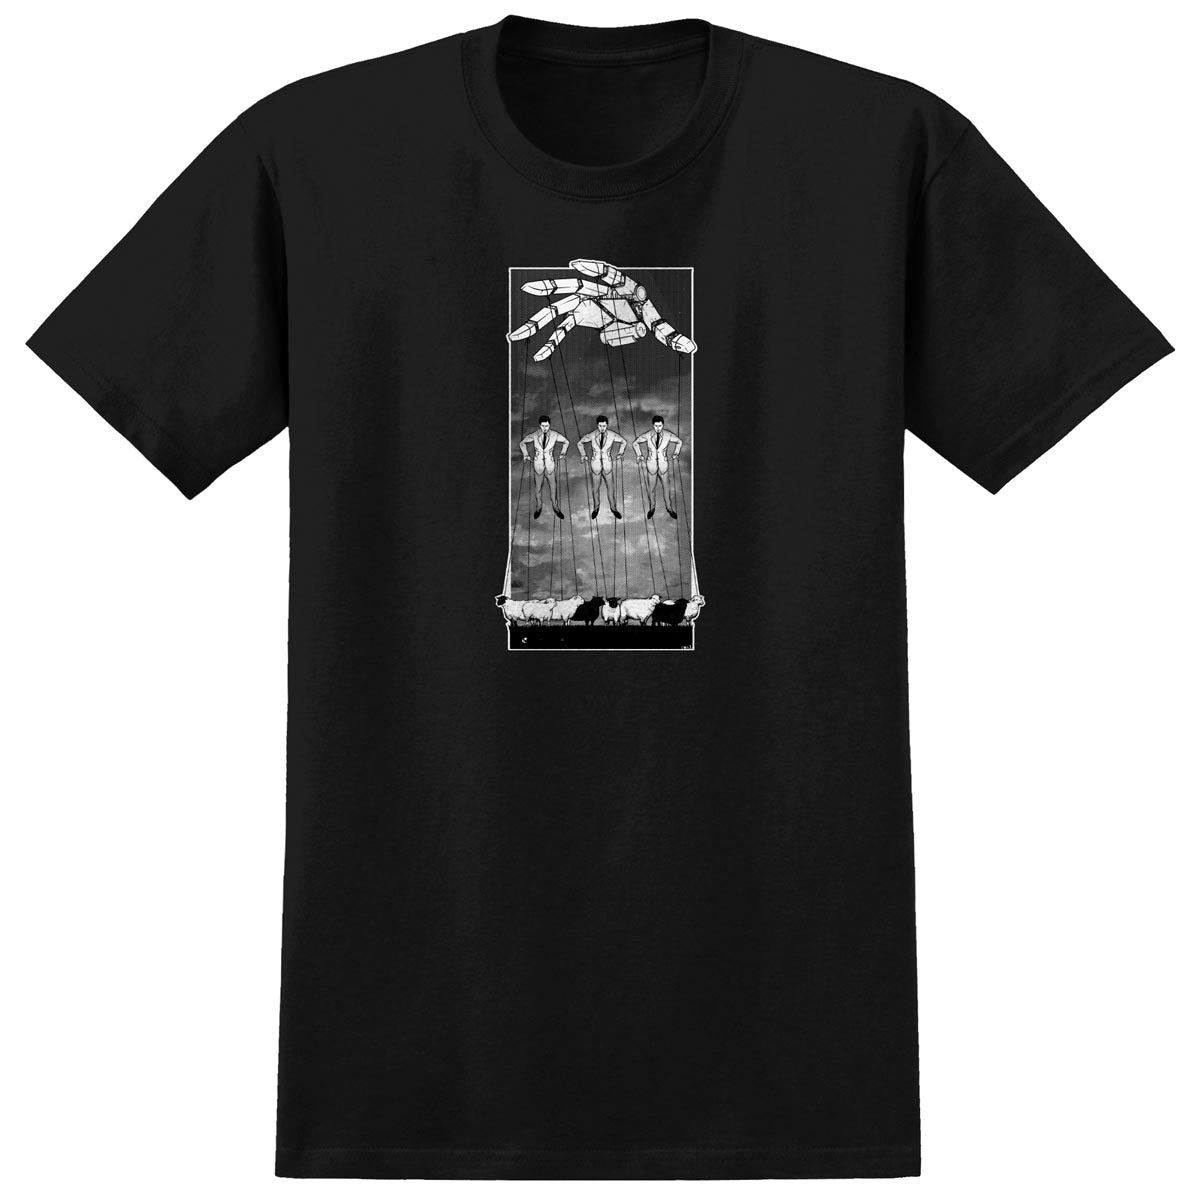 Real Overlord T-Shirt - Black image 1